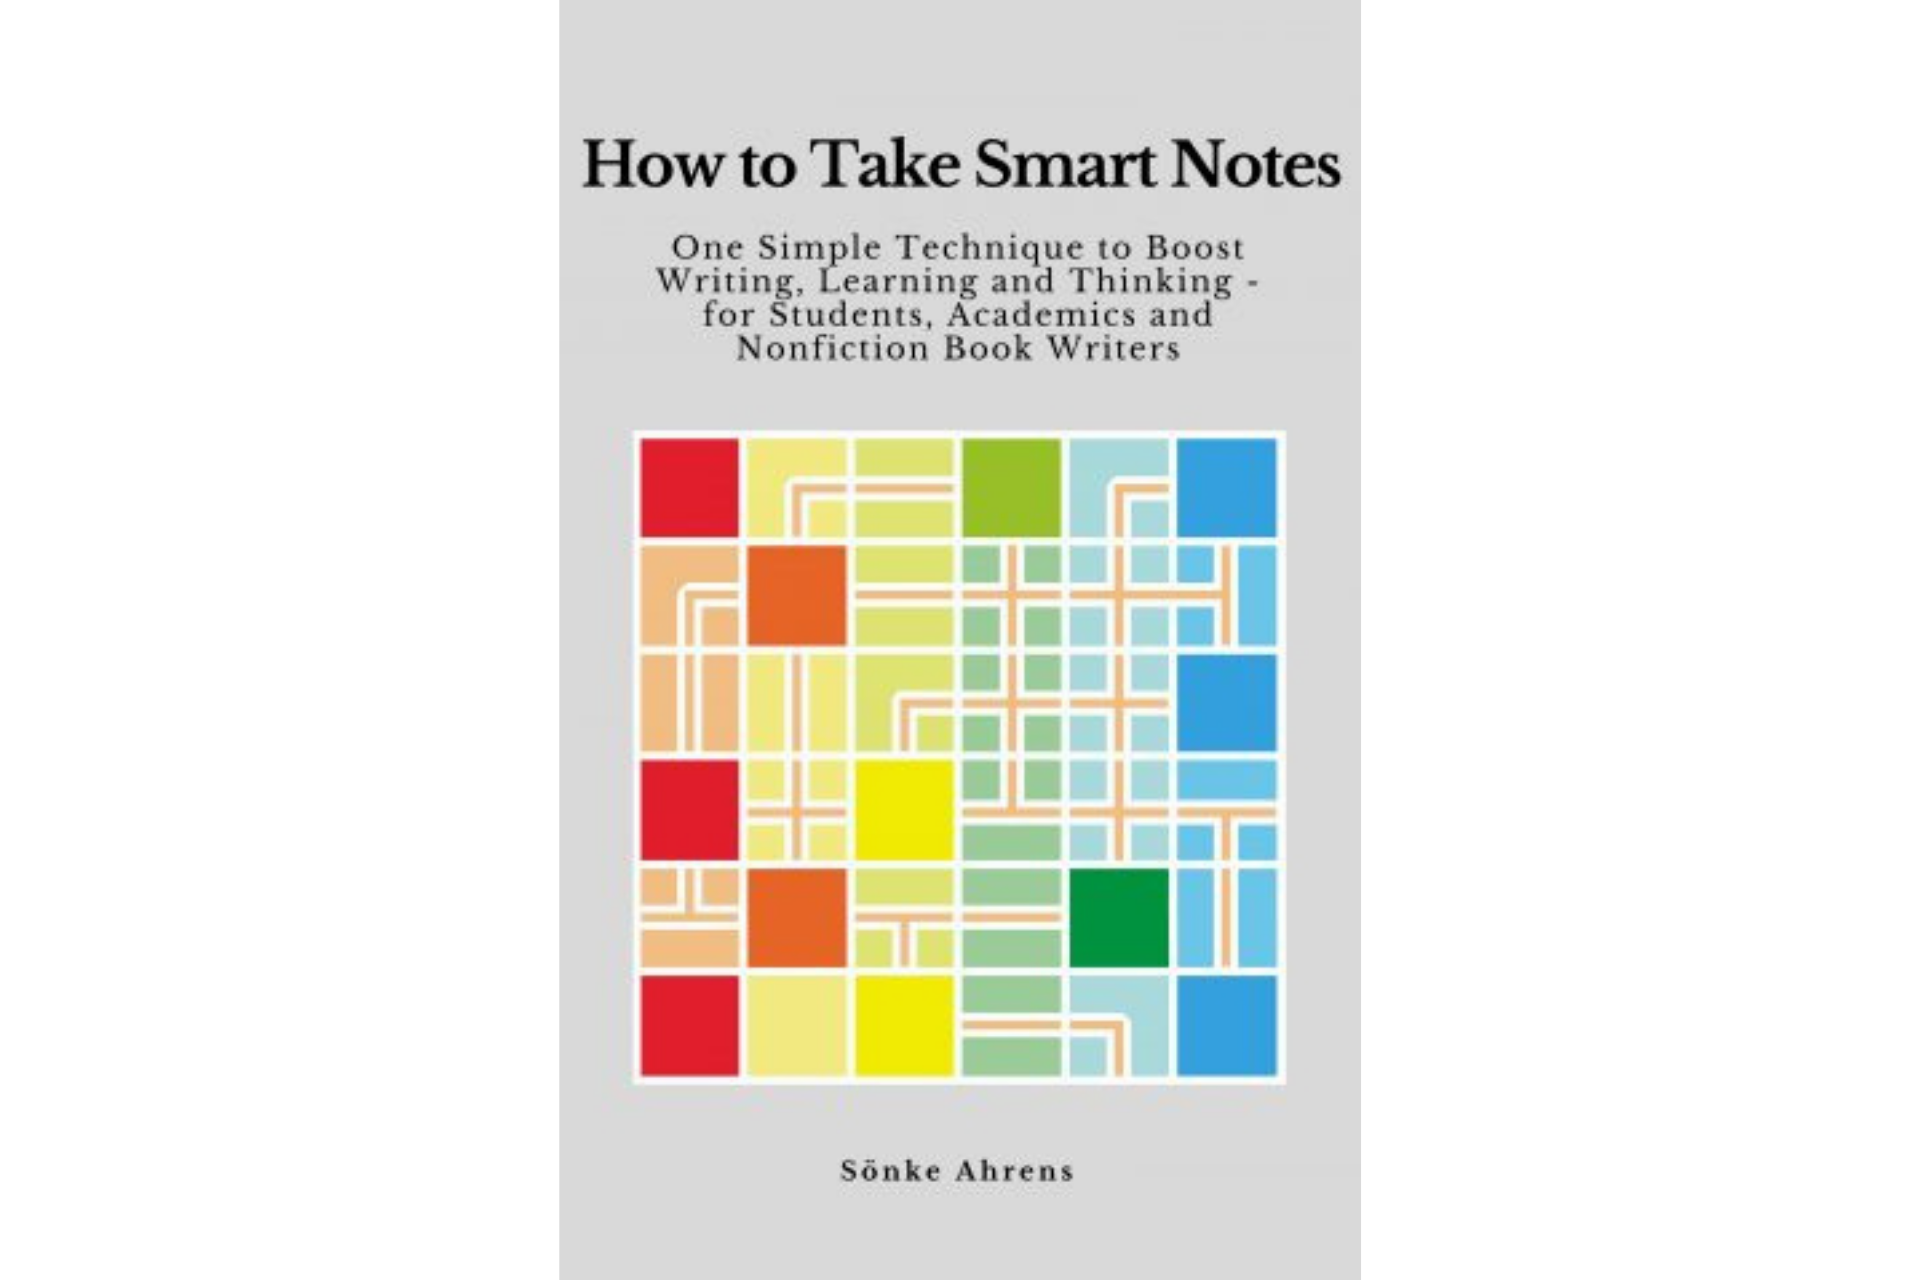 How to Take Smart Notes by Sonke Ahrens